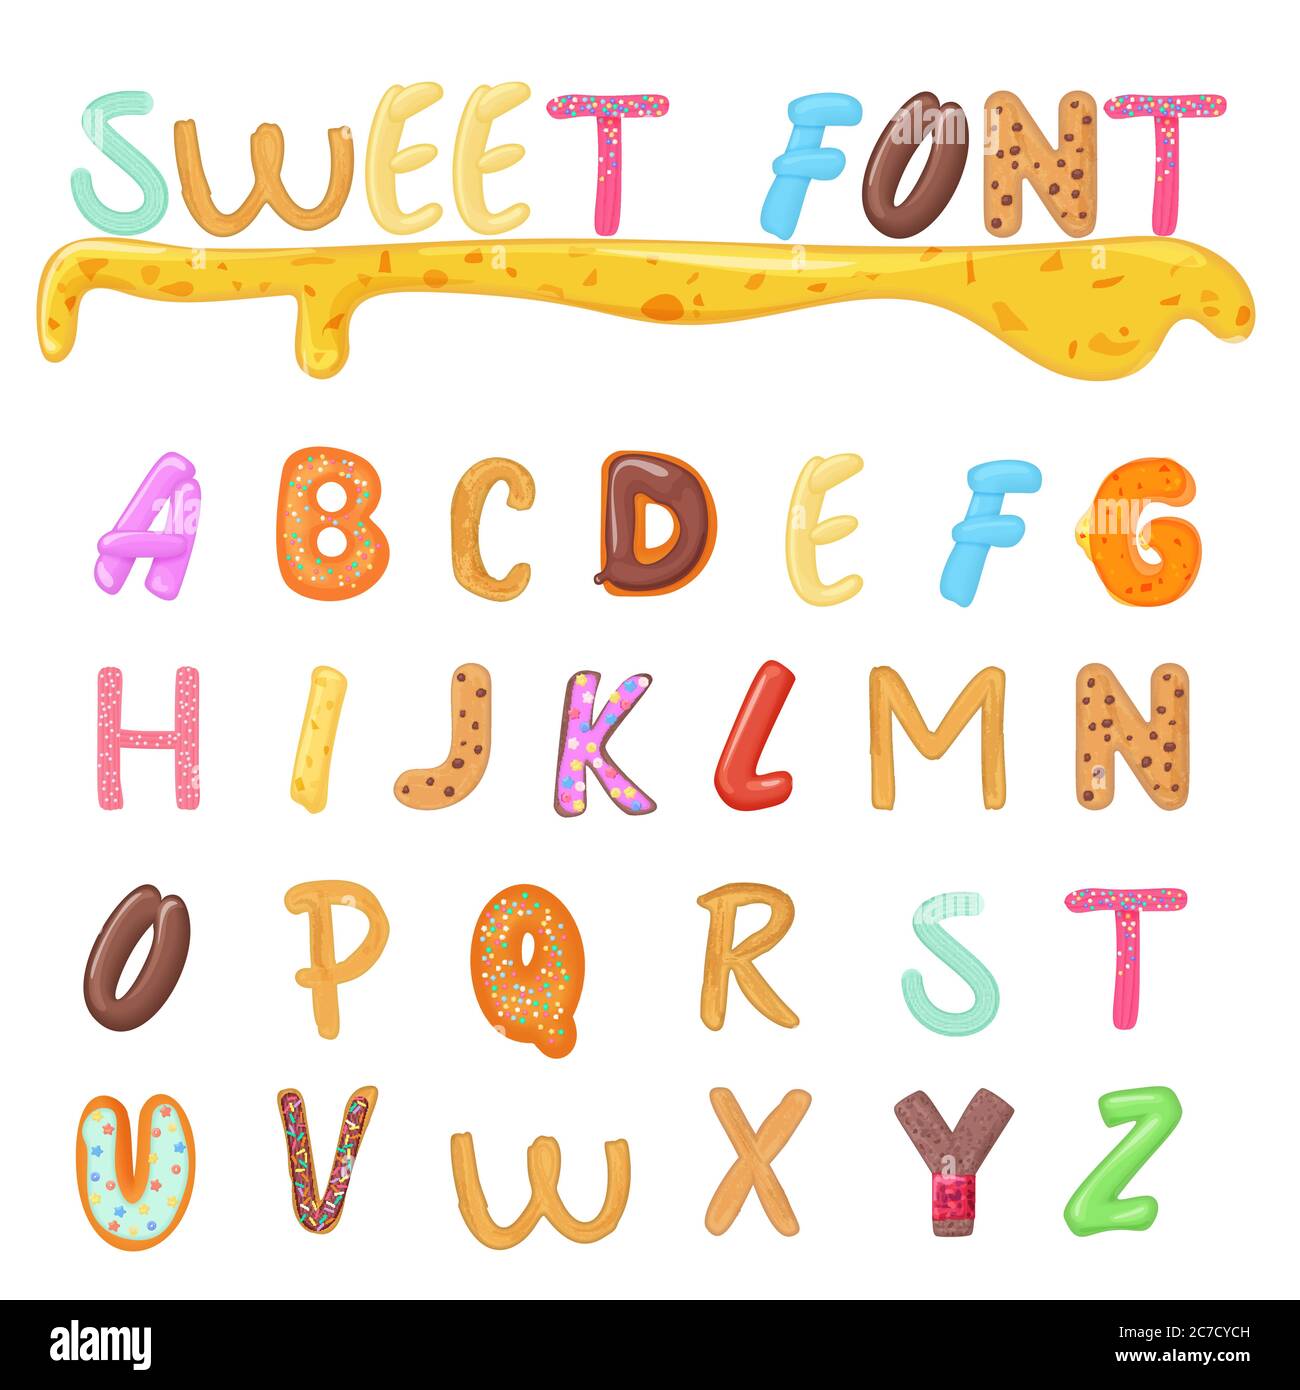 Sweets, cookies and bakery font design. Kids style funny alphabet letters Stock Vector